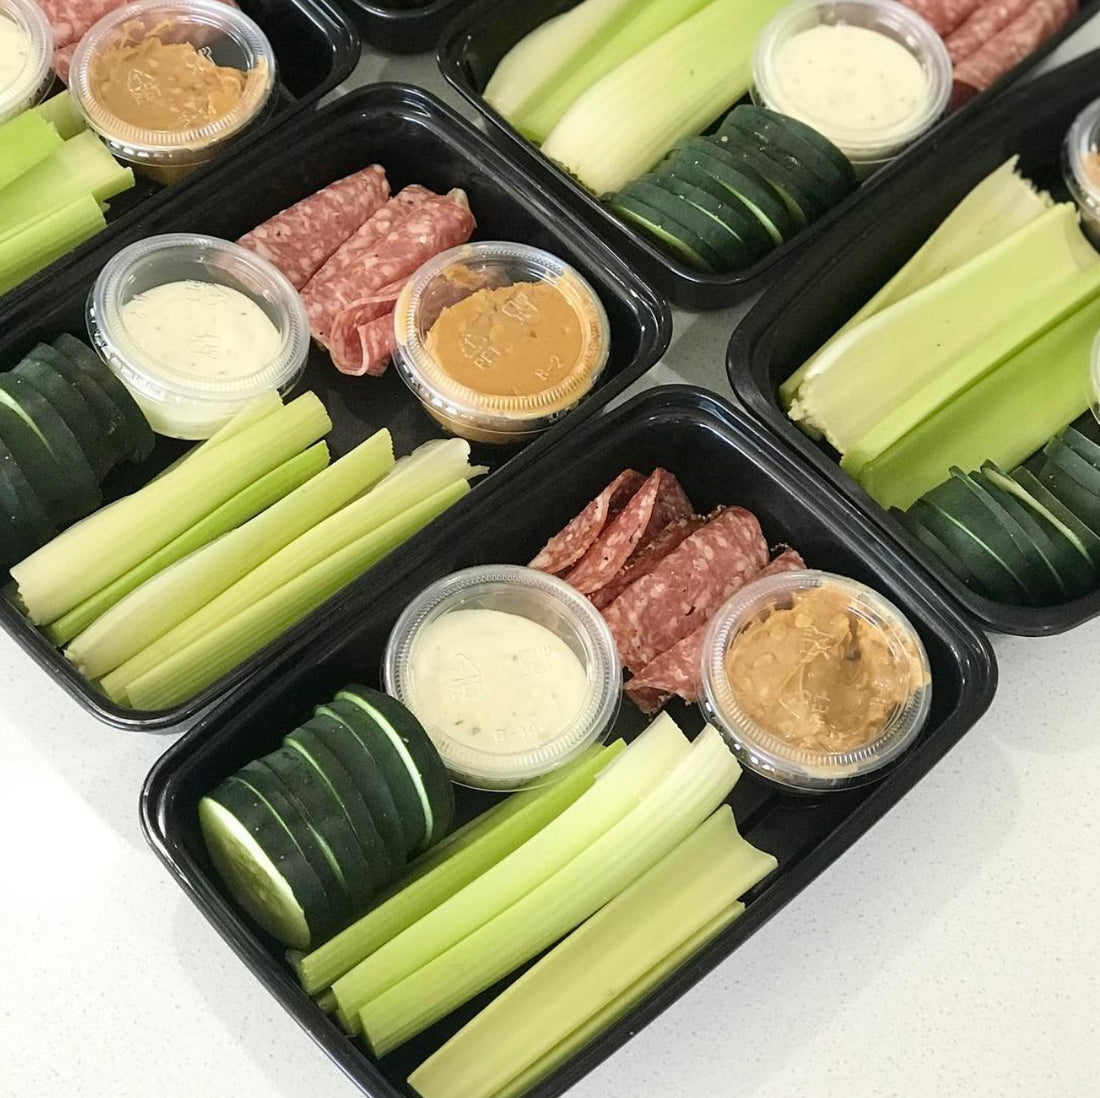 Snack Box Idea WITHOUT Eggs